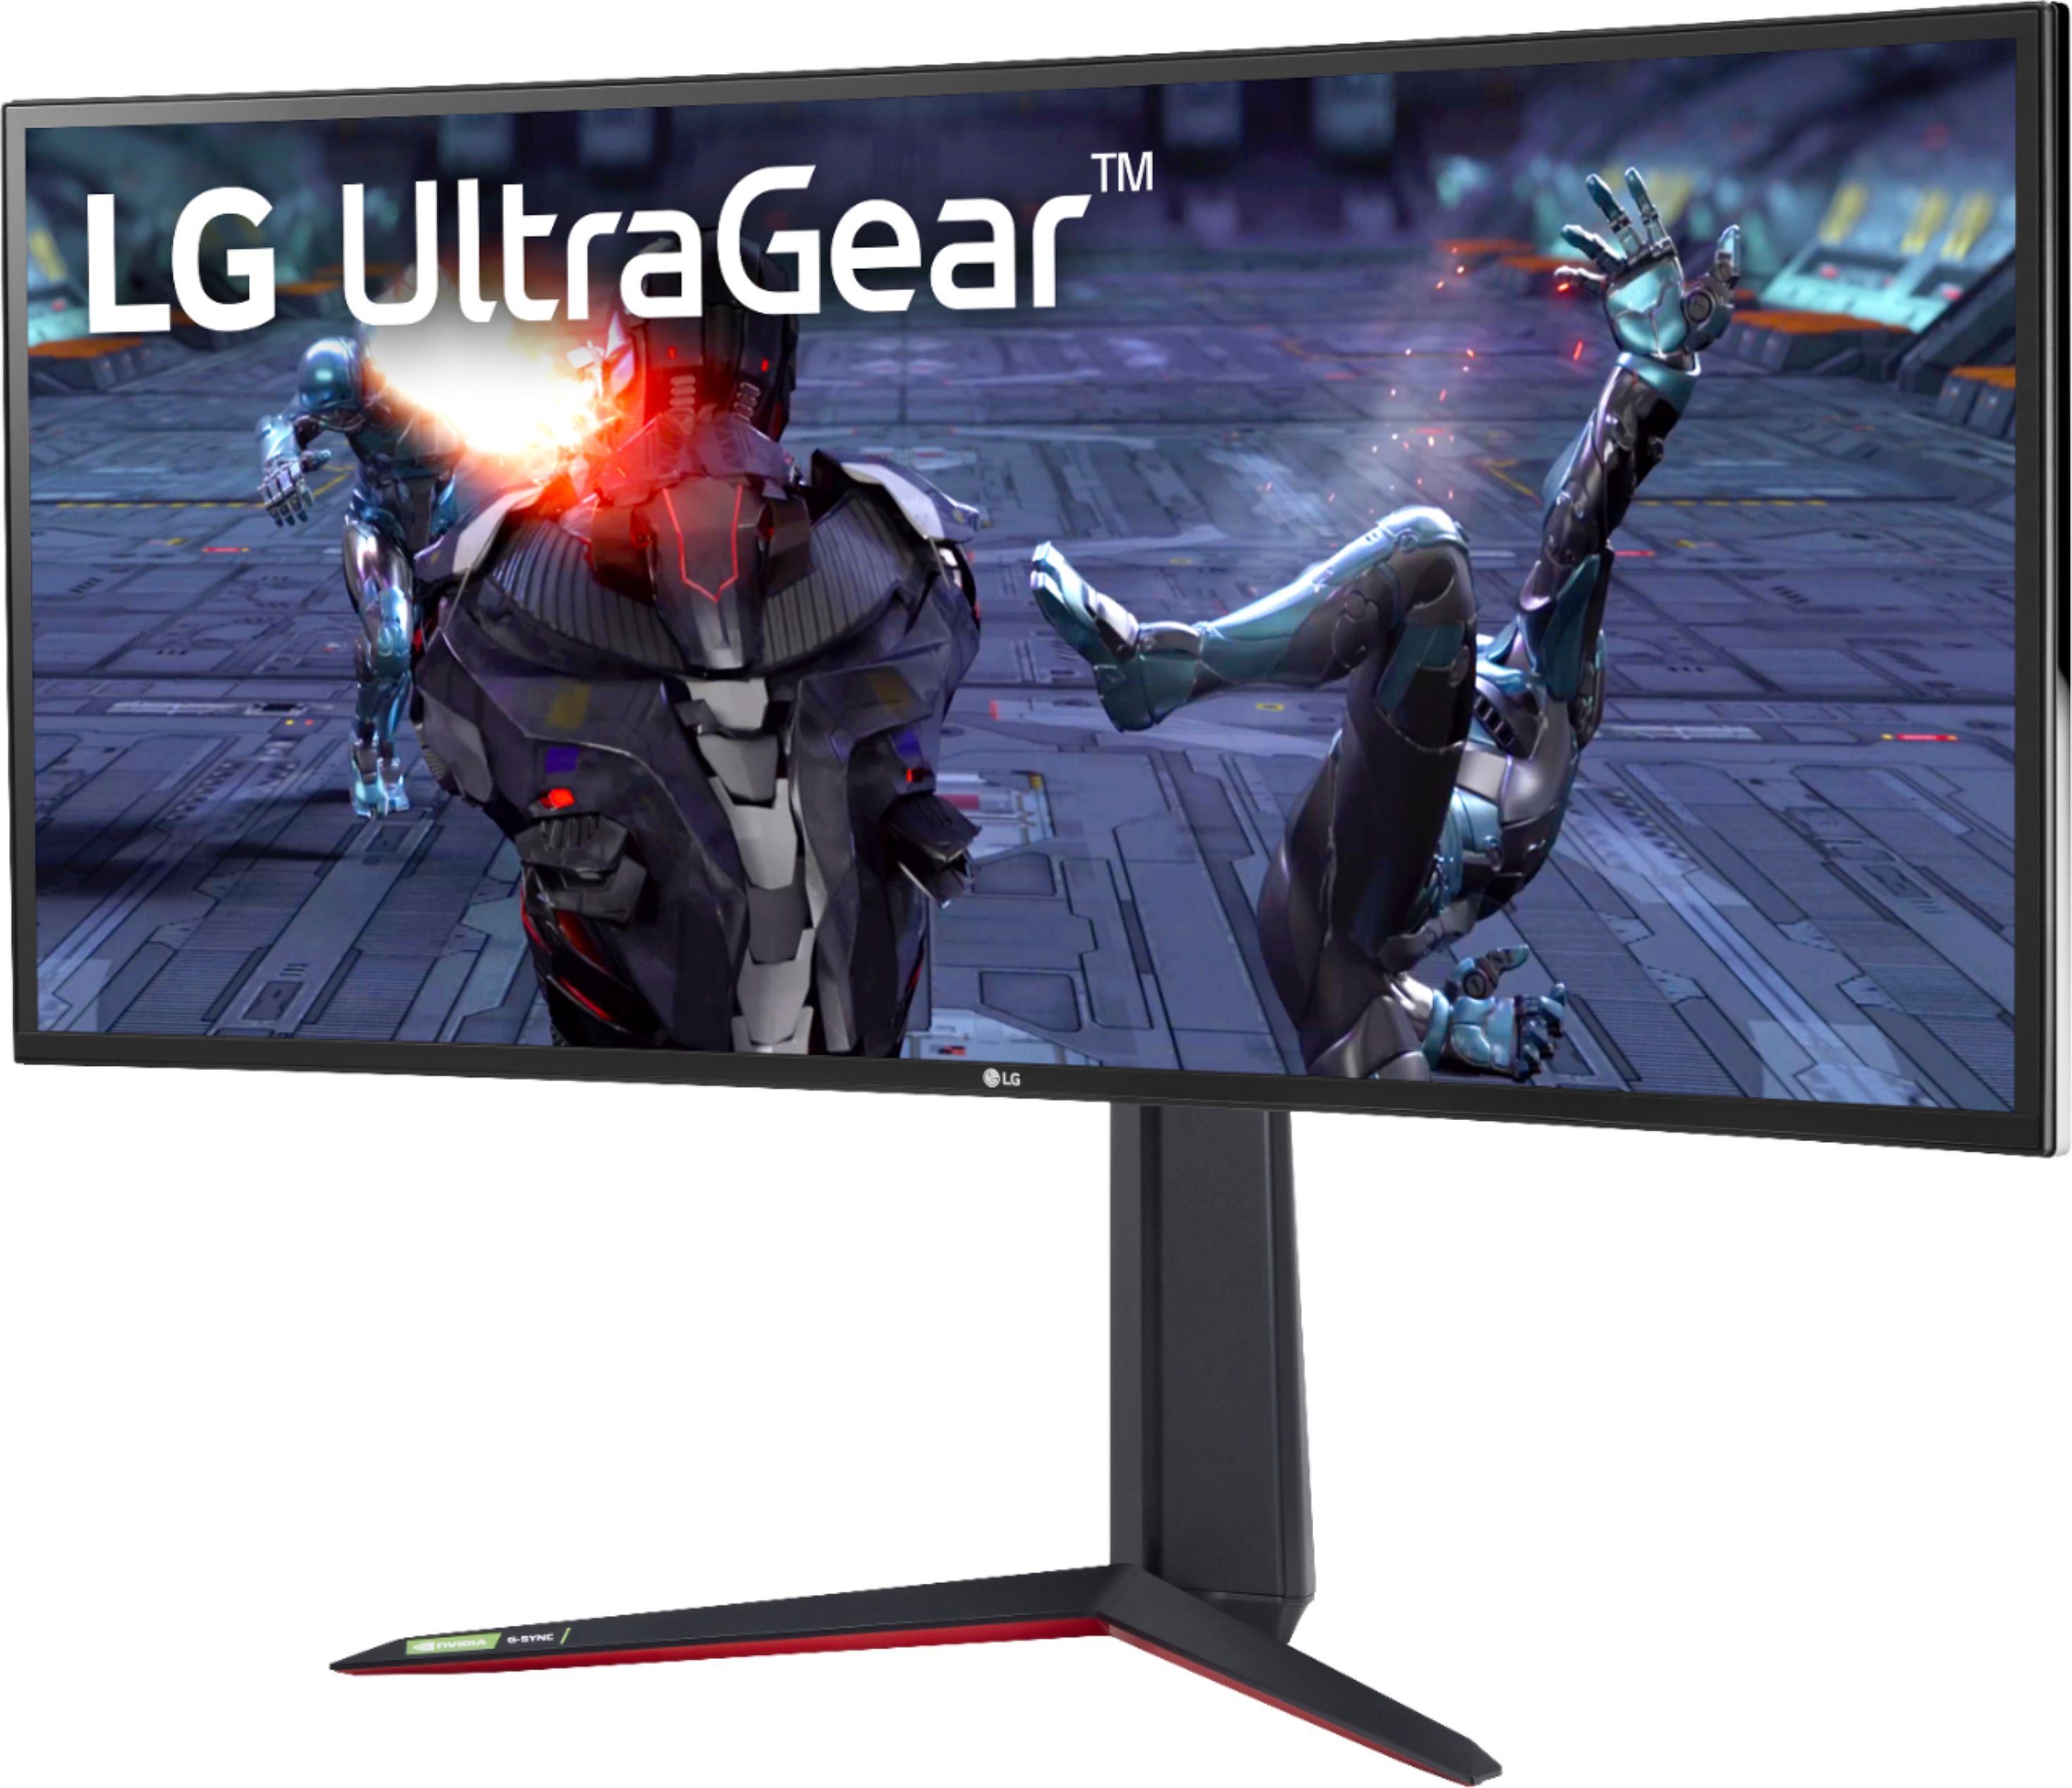 Left View: LG - Geek Squad Certified Refurbished UltraGear 34" IPS LED UltraWide HD FreeSync and G-SYNC Compatible Monitor with HDR - Black